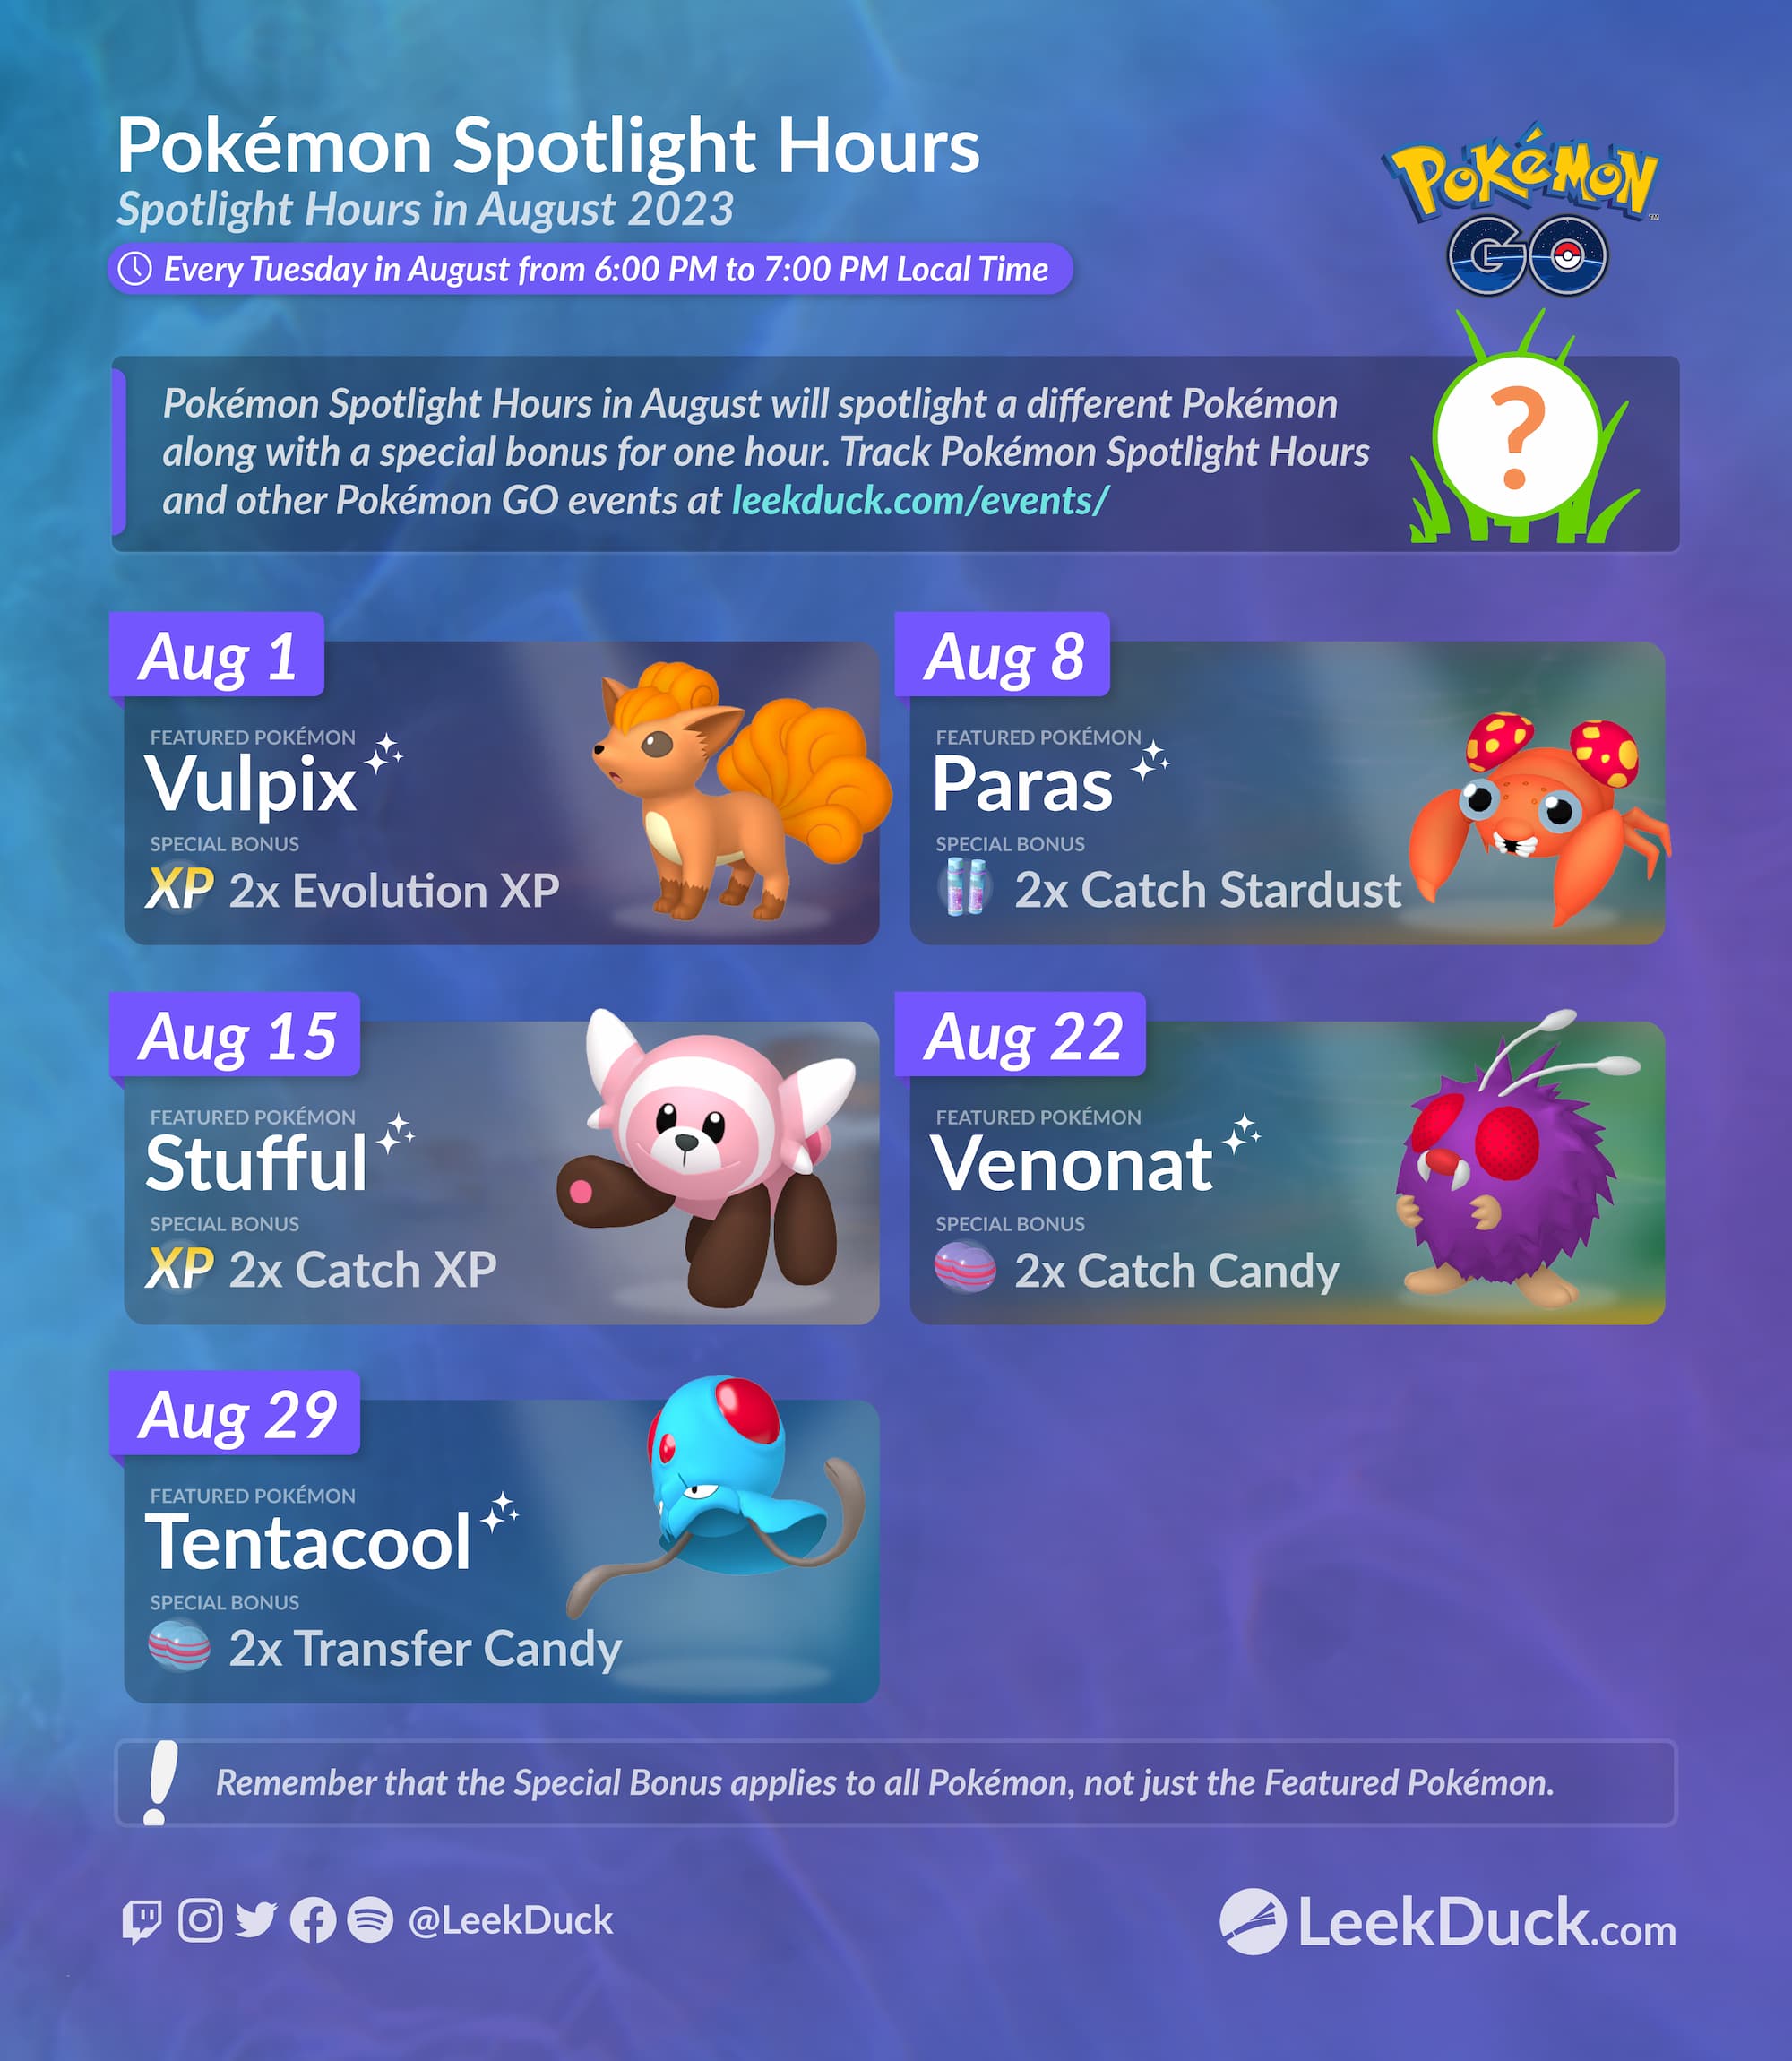 Pokemon Go Chooses Onix for First Spotlight Hour Event